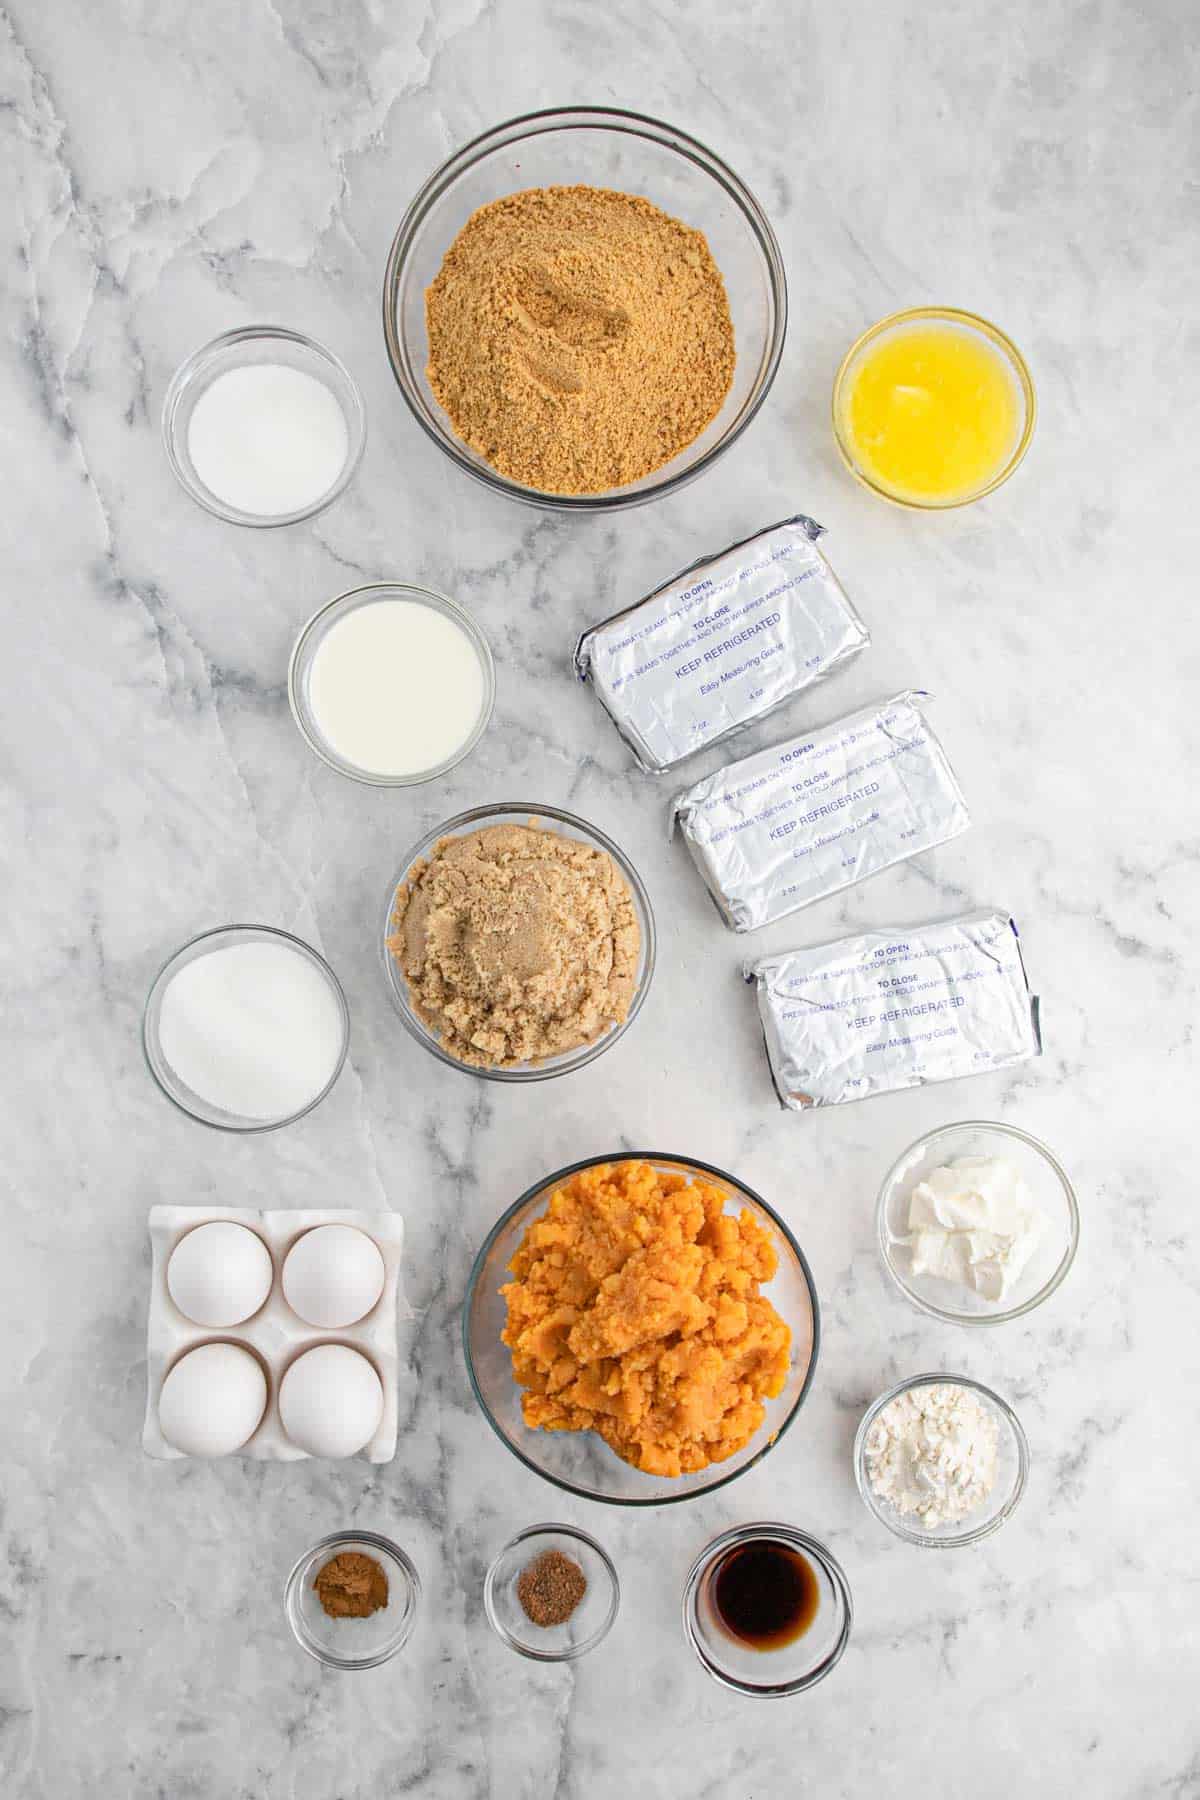 Ingredients to make sweet potato cheesecake on the table ready to mix up.